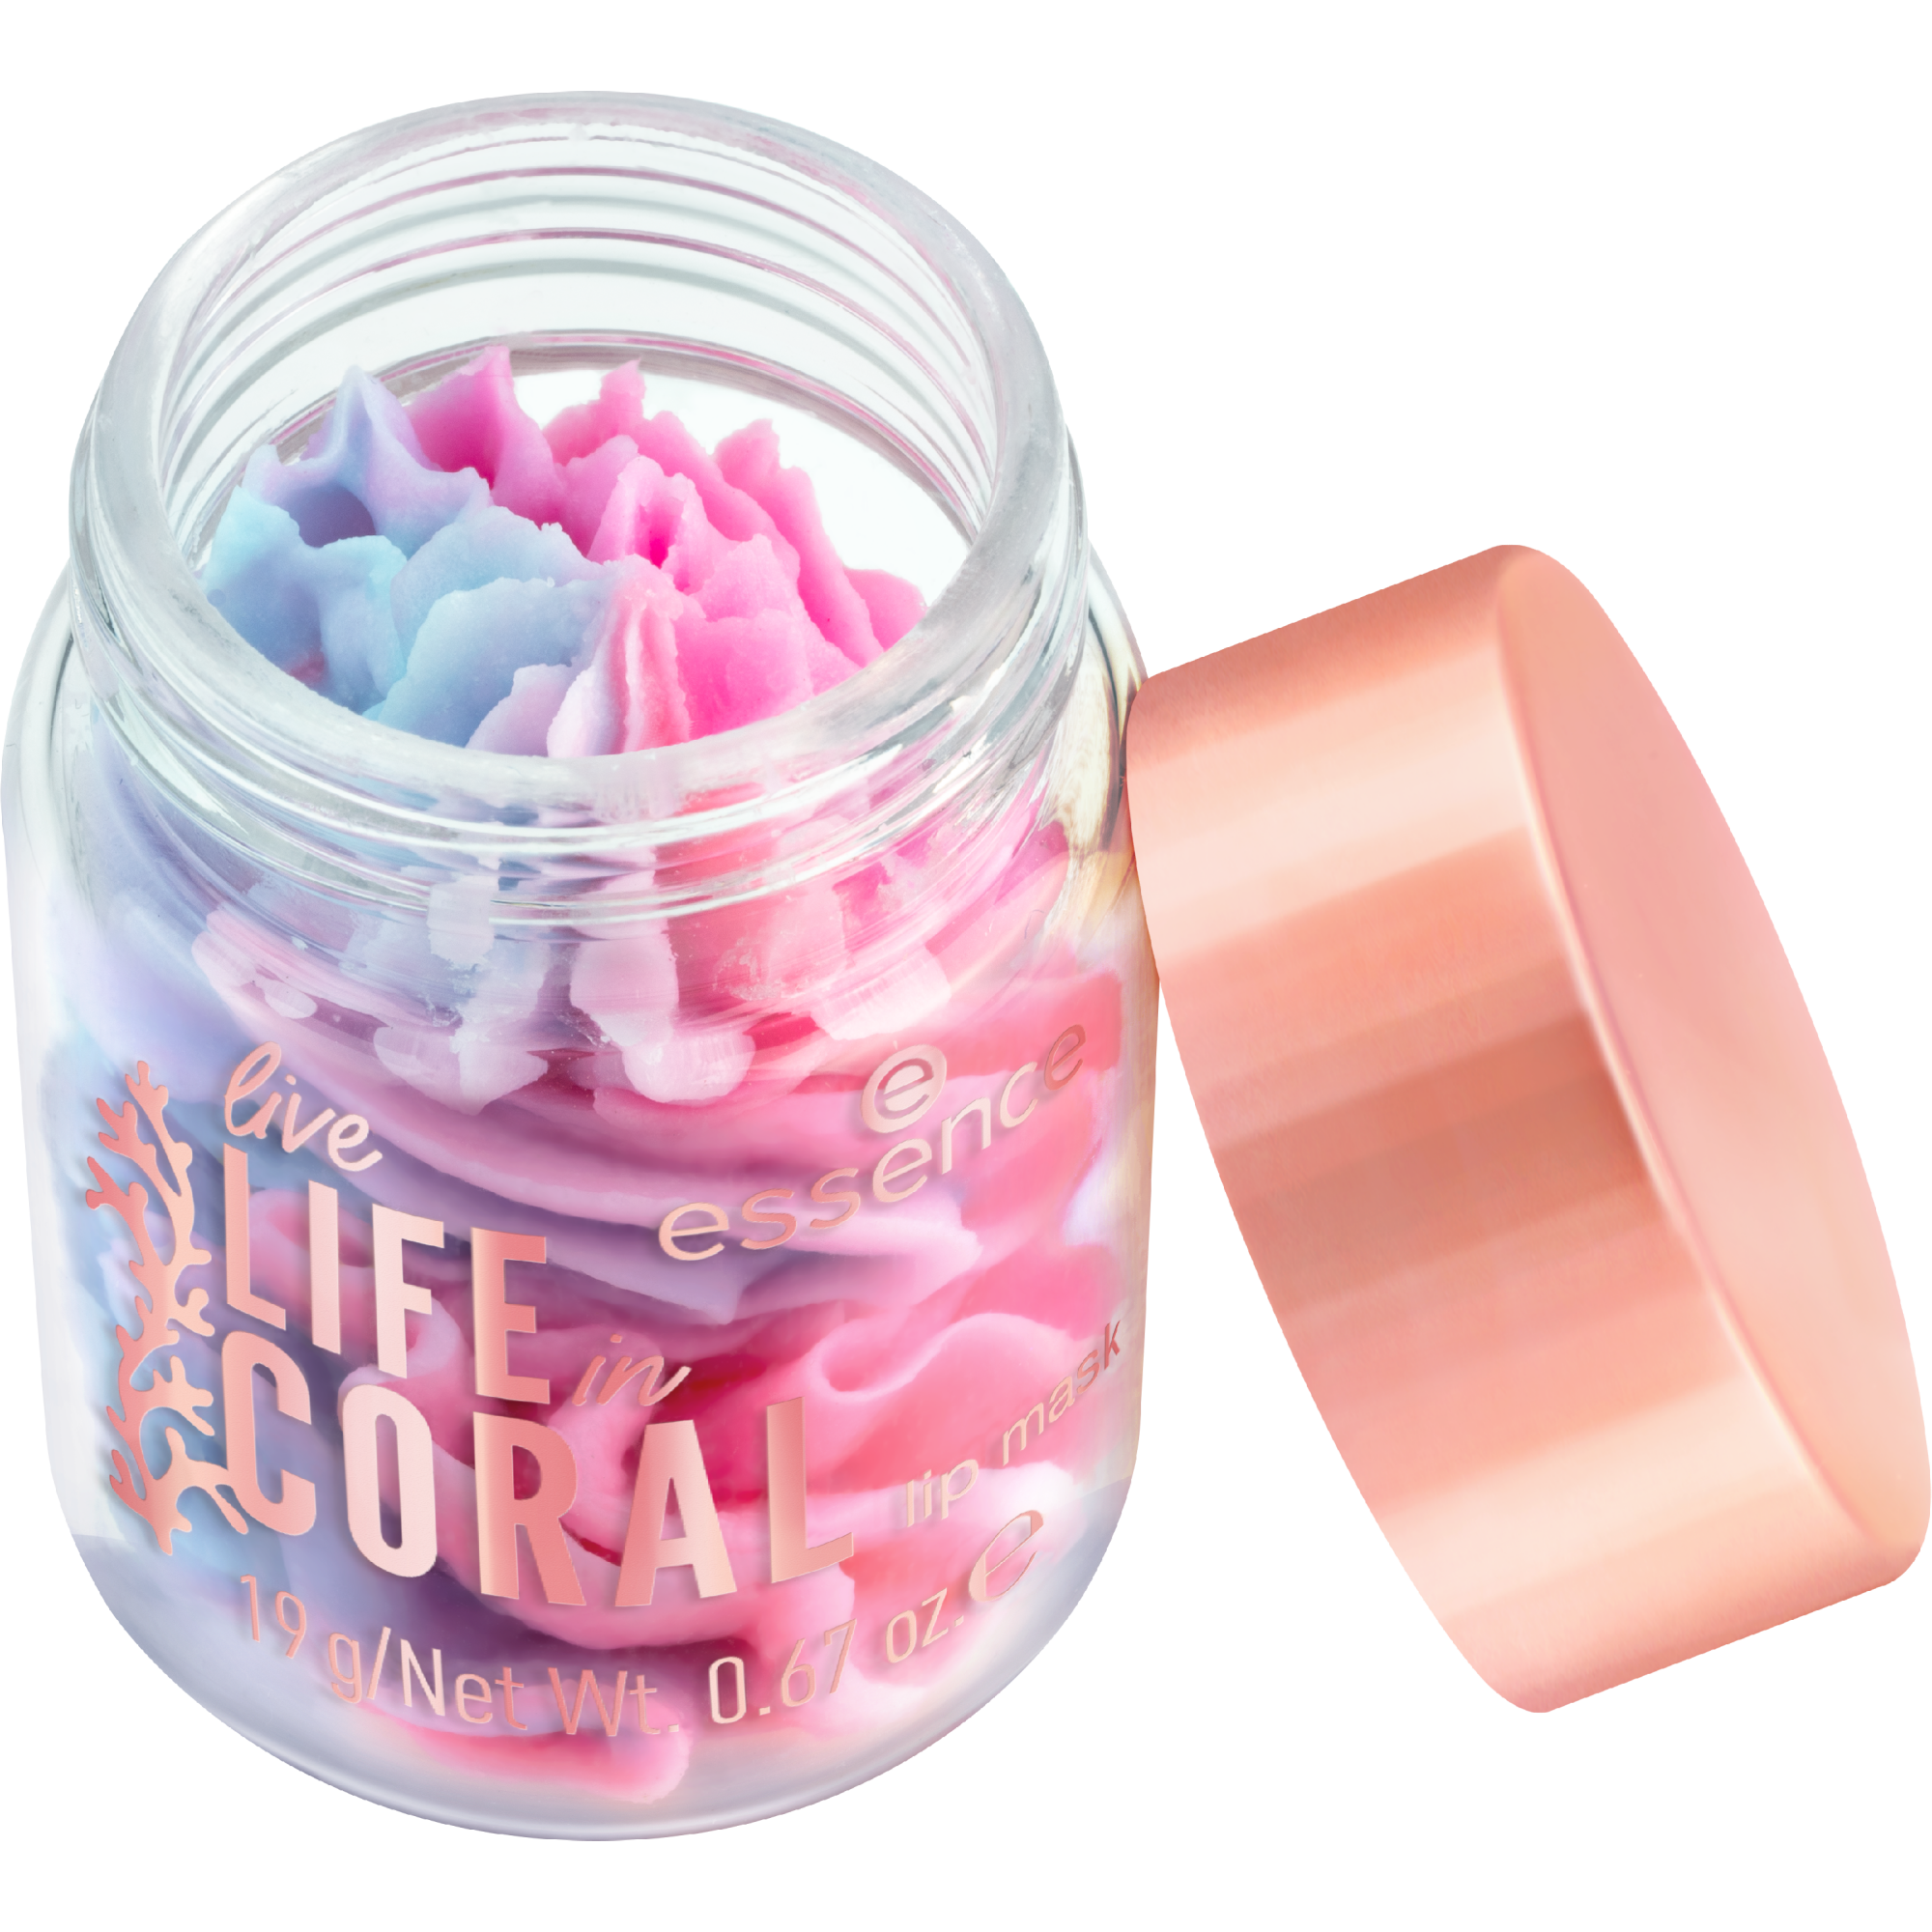 live LIFE in CORAL lip mask masque lèvres